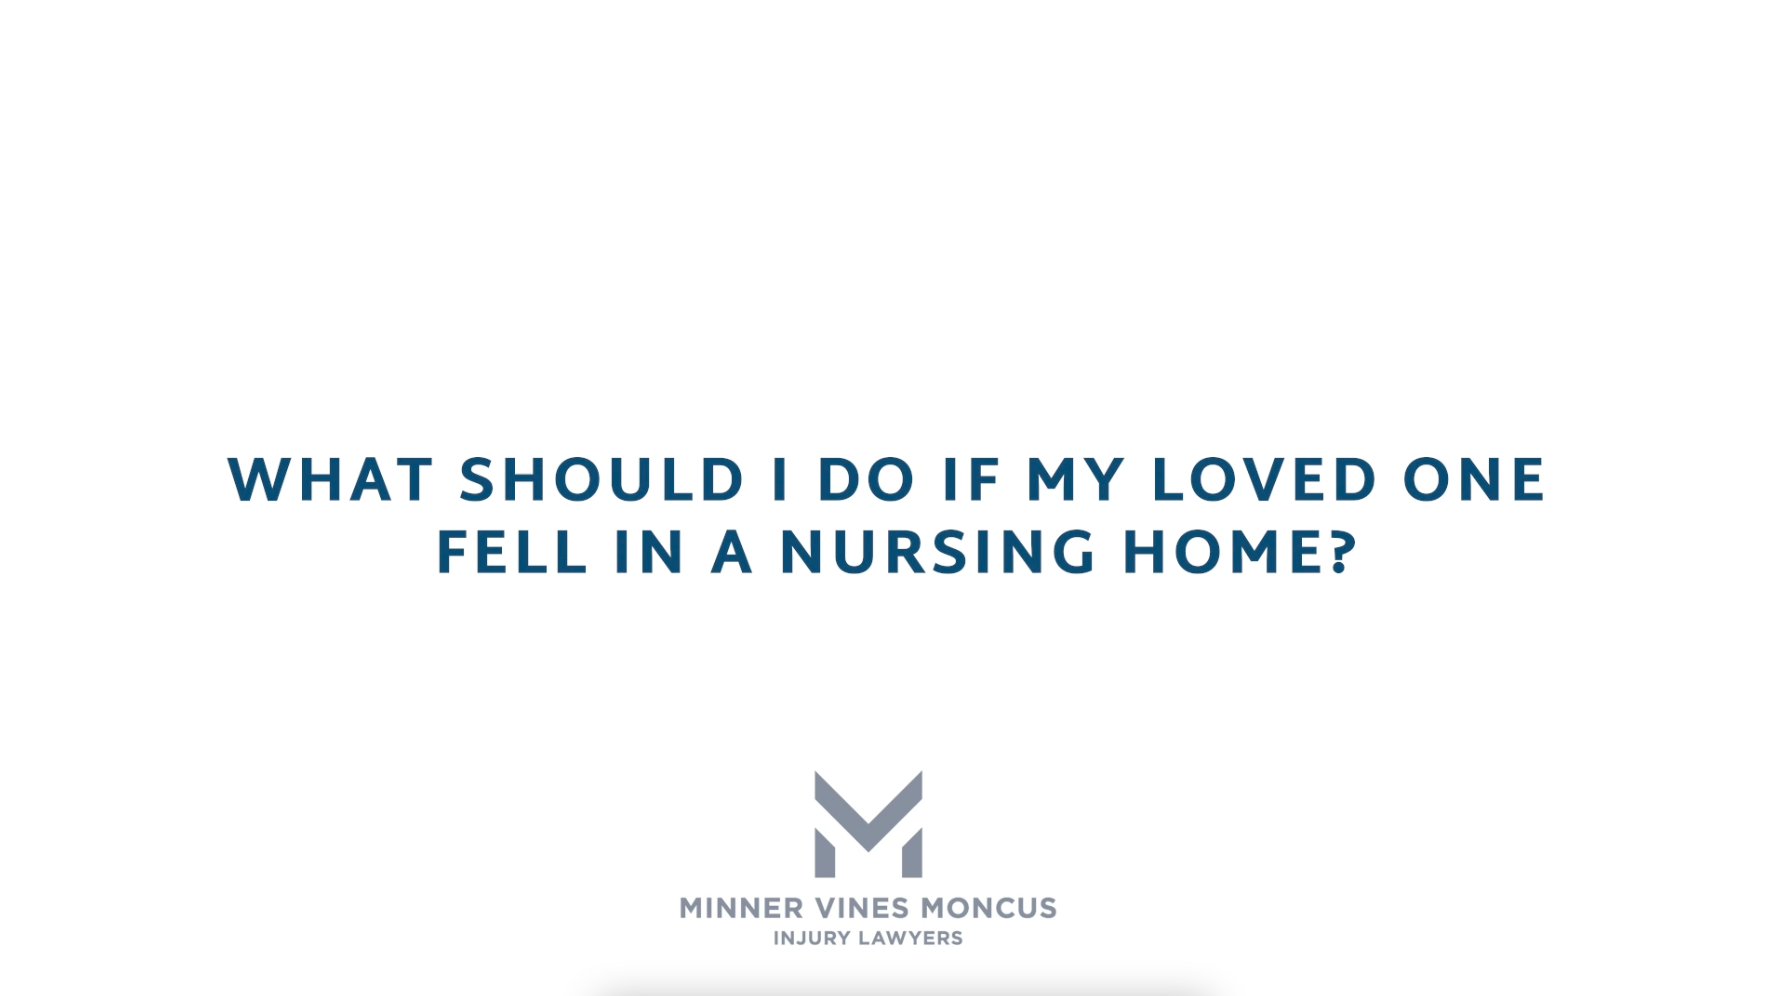 What should I do if my loved one fell in a nursing home?